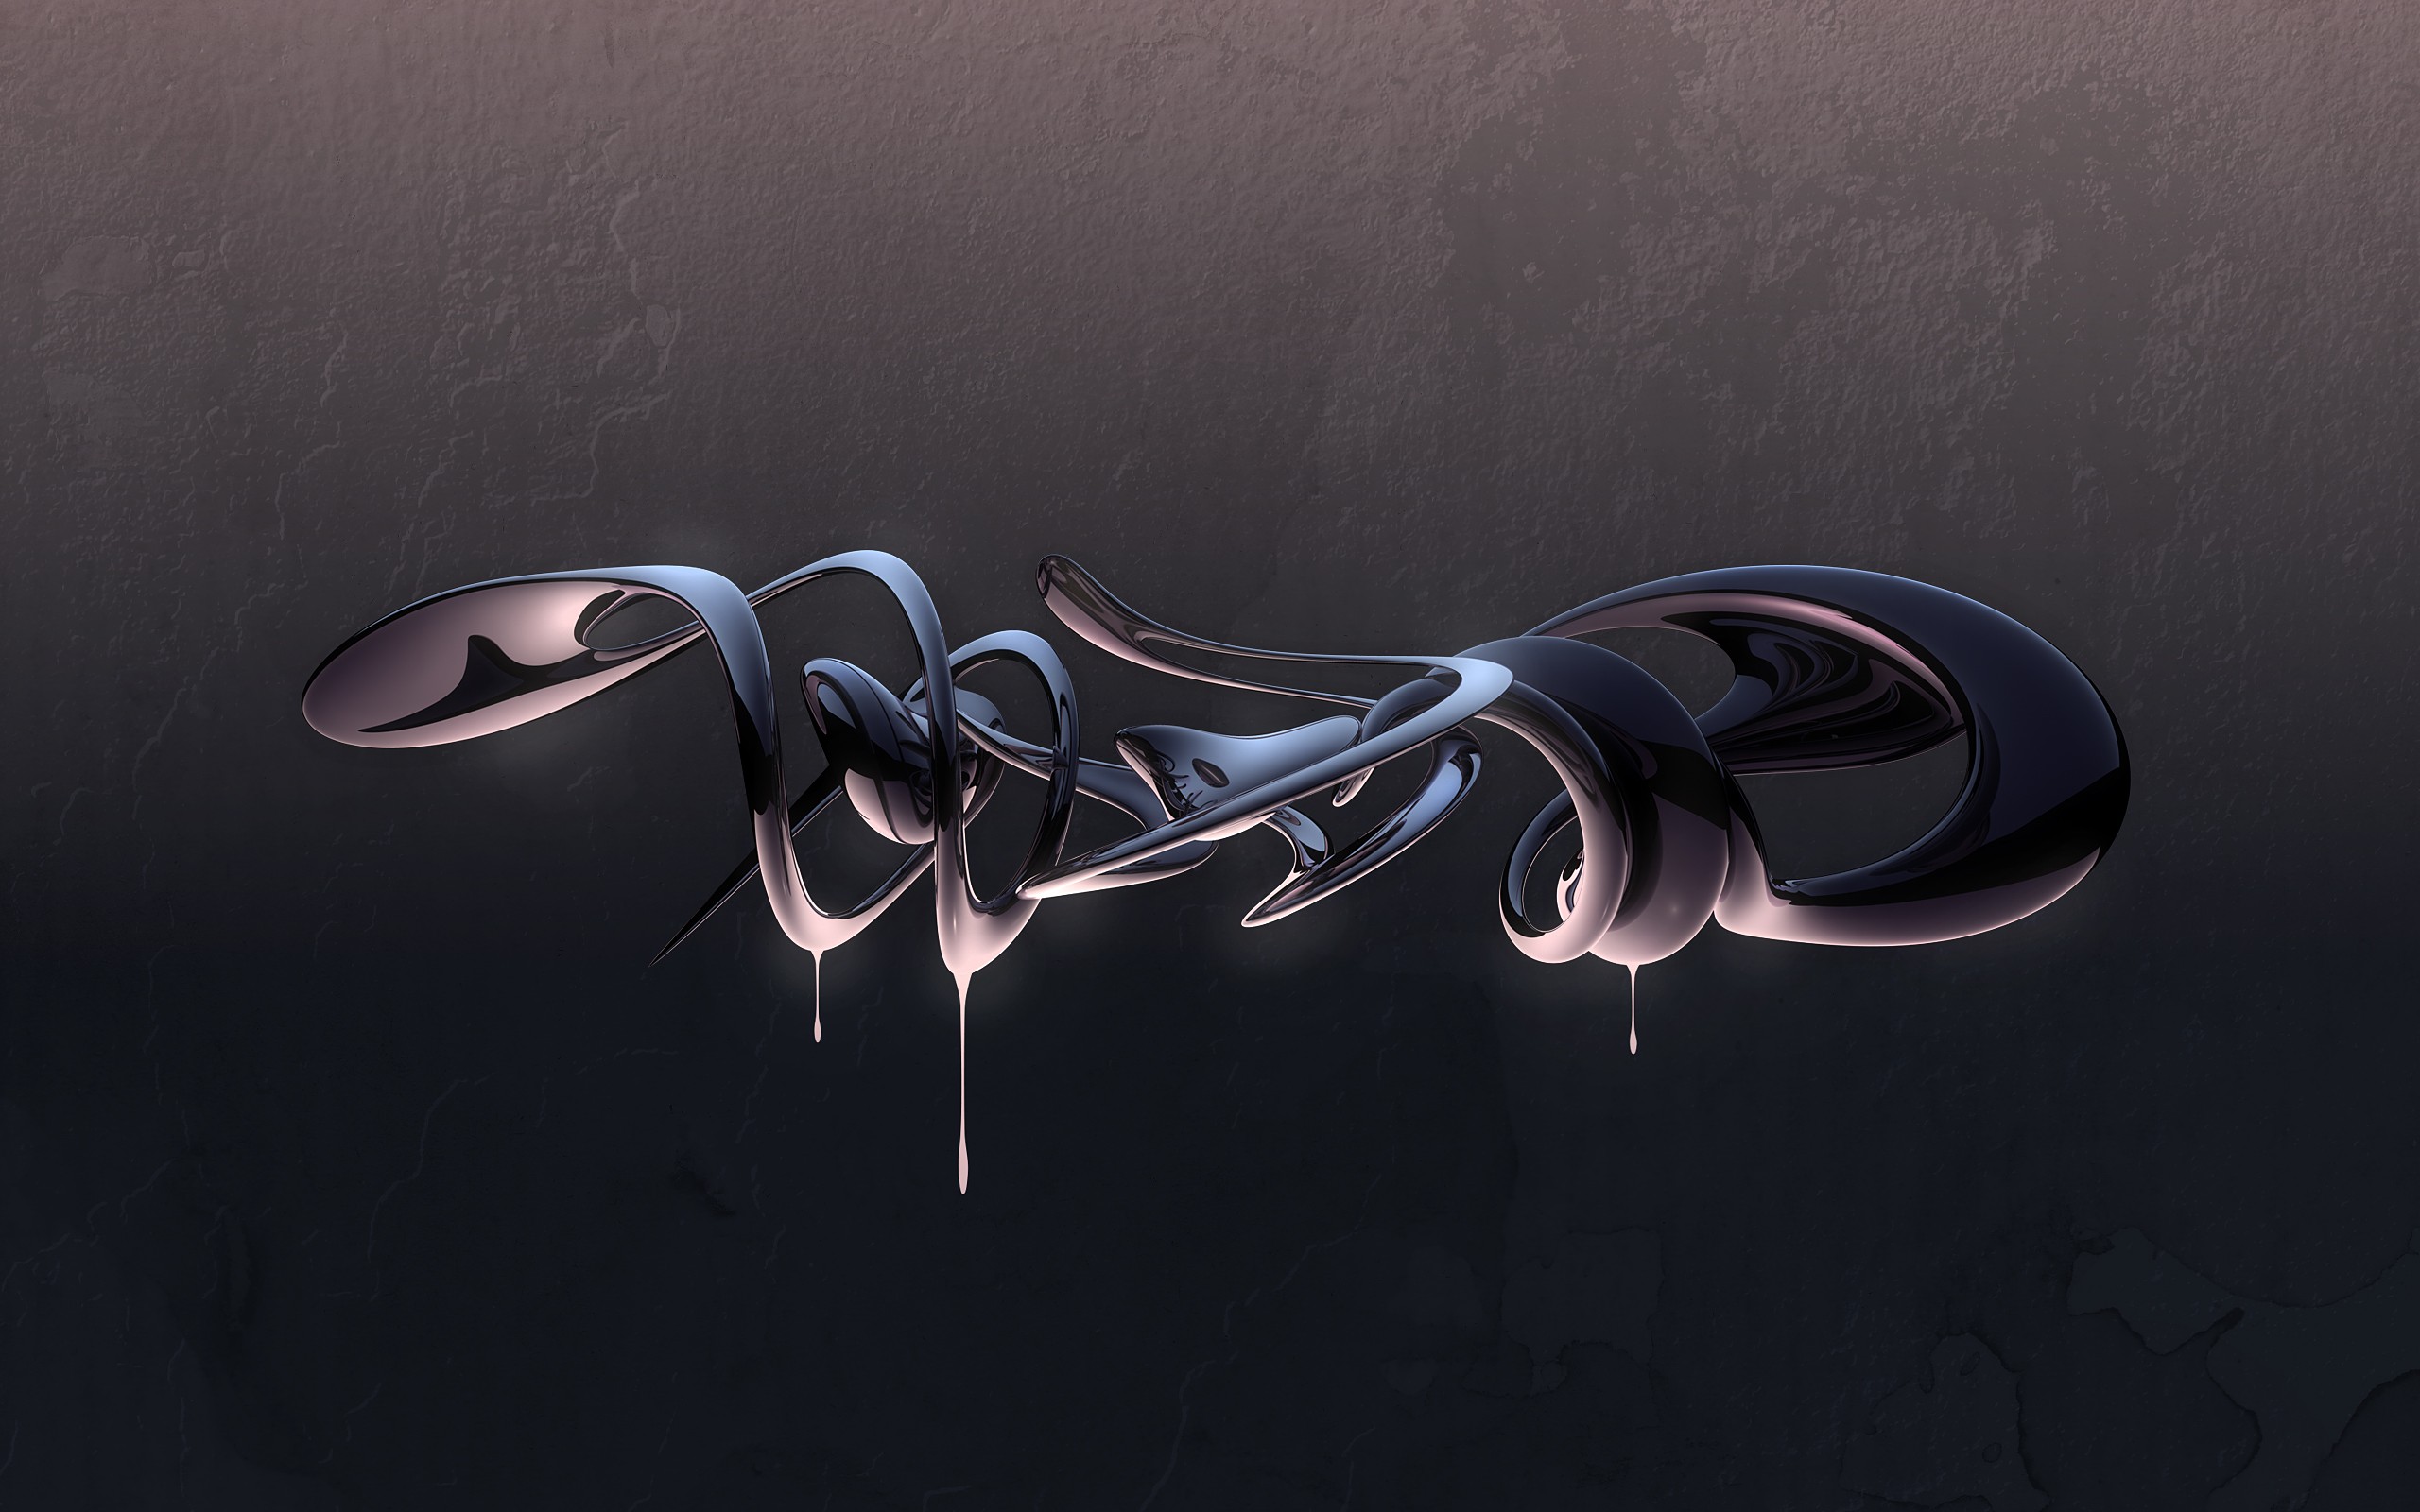 Artwork Digital Art Simple Background 3D 3D Abstract Abstract Melting 2560x1600